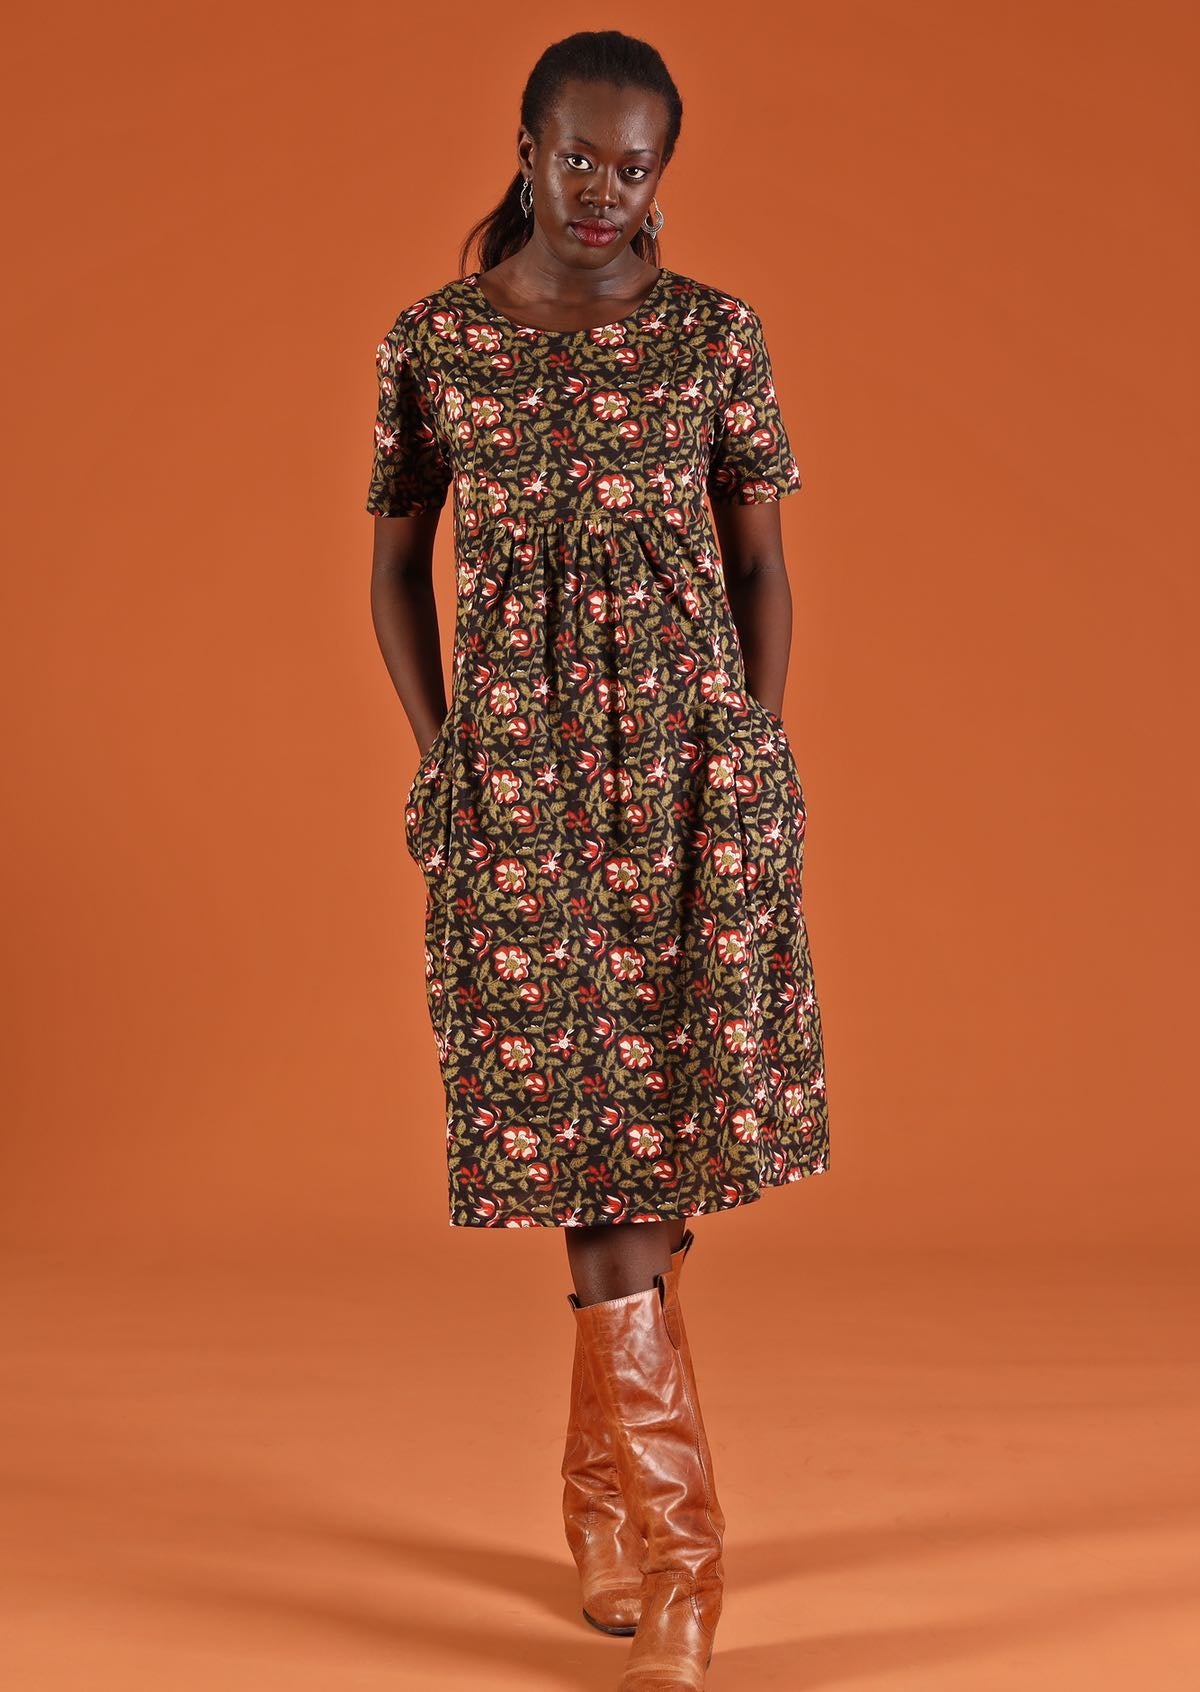 A model is wearing a 100% cotton floral dress